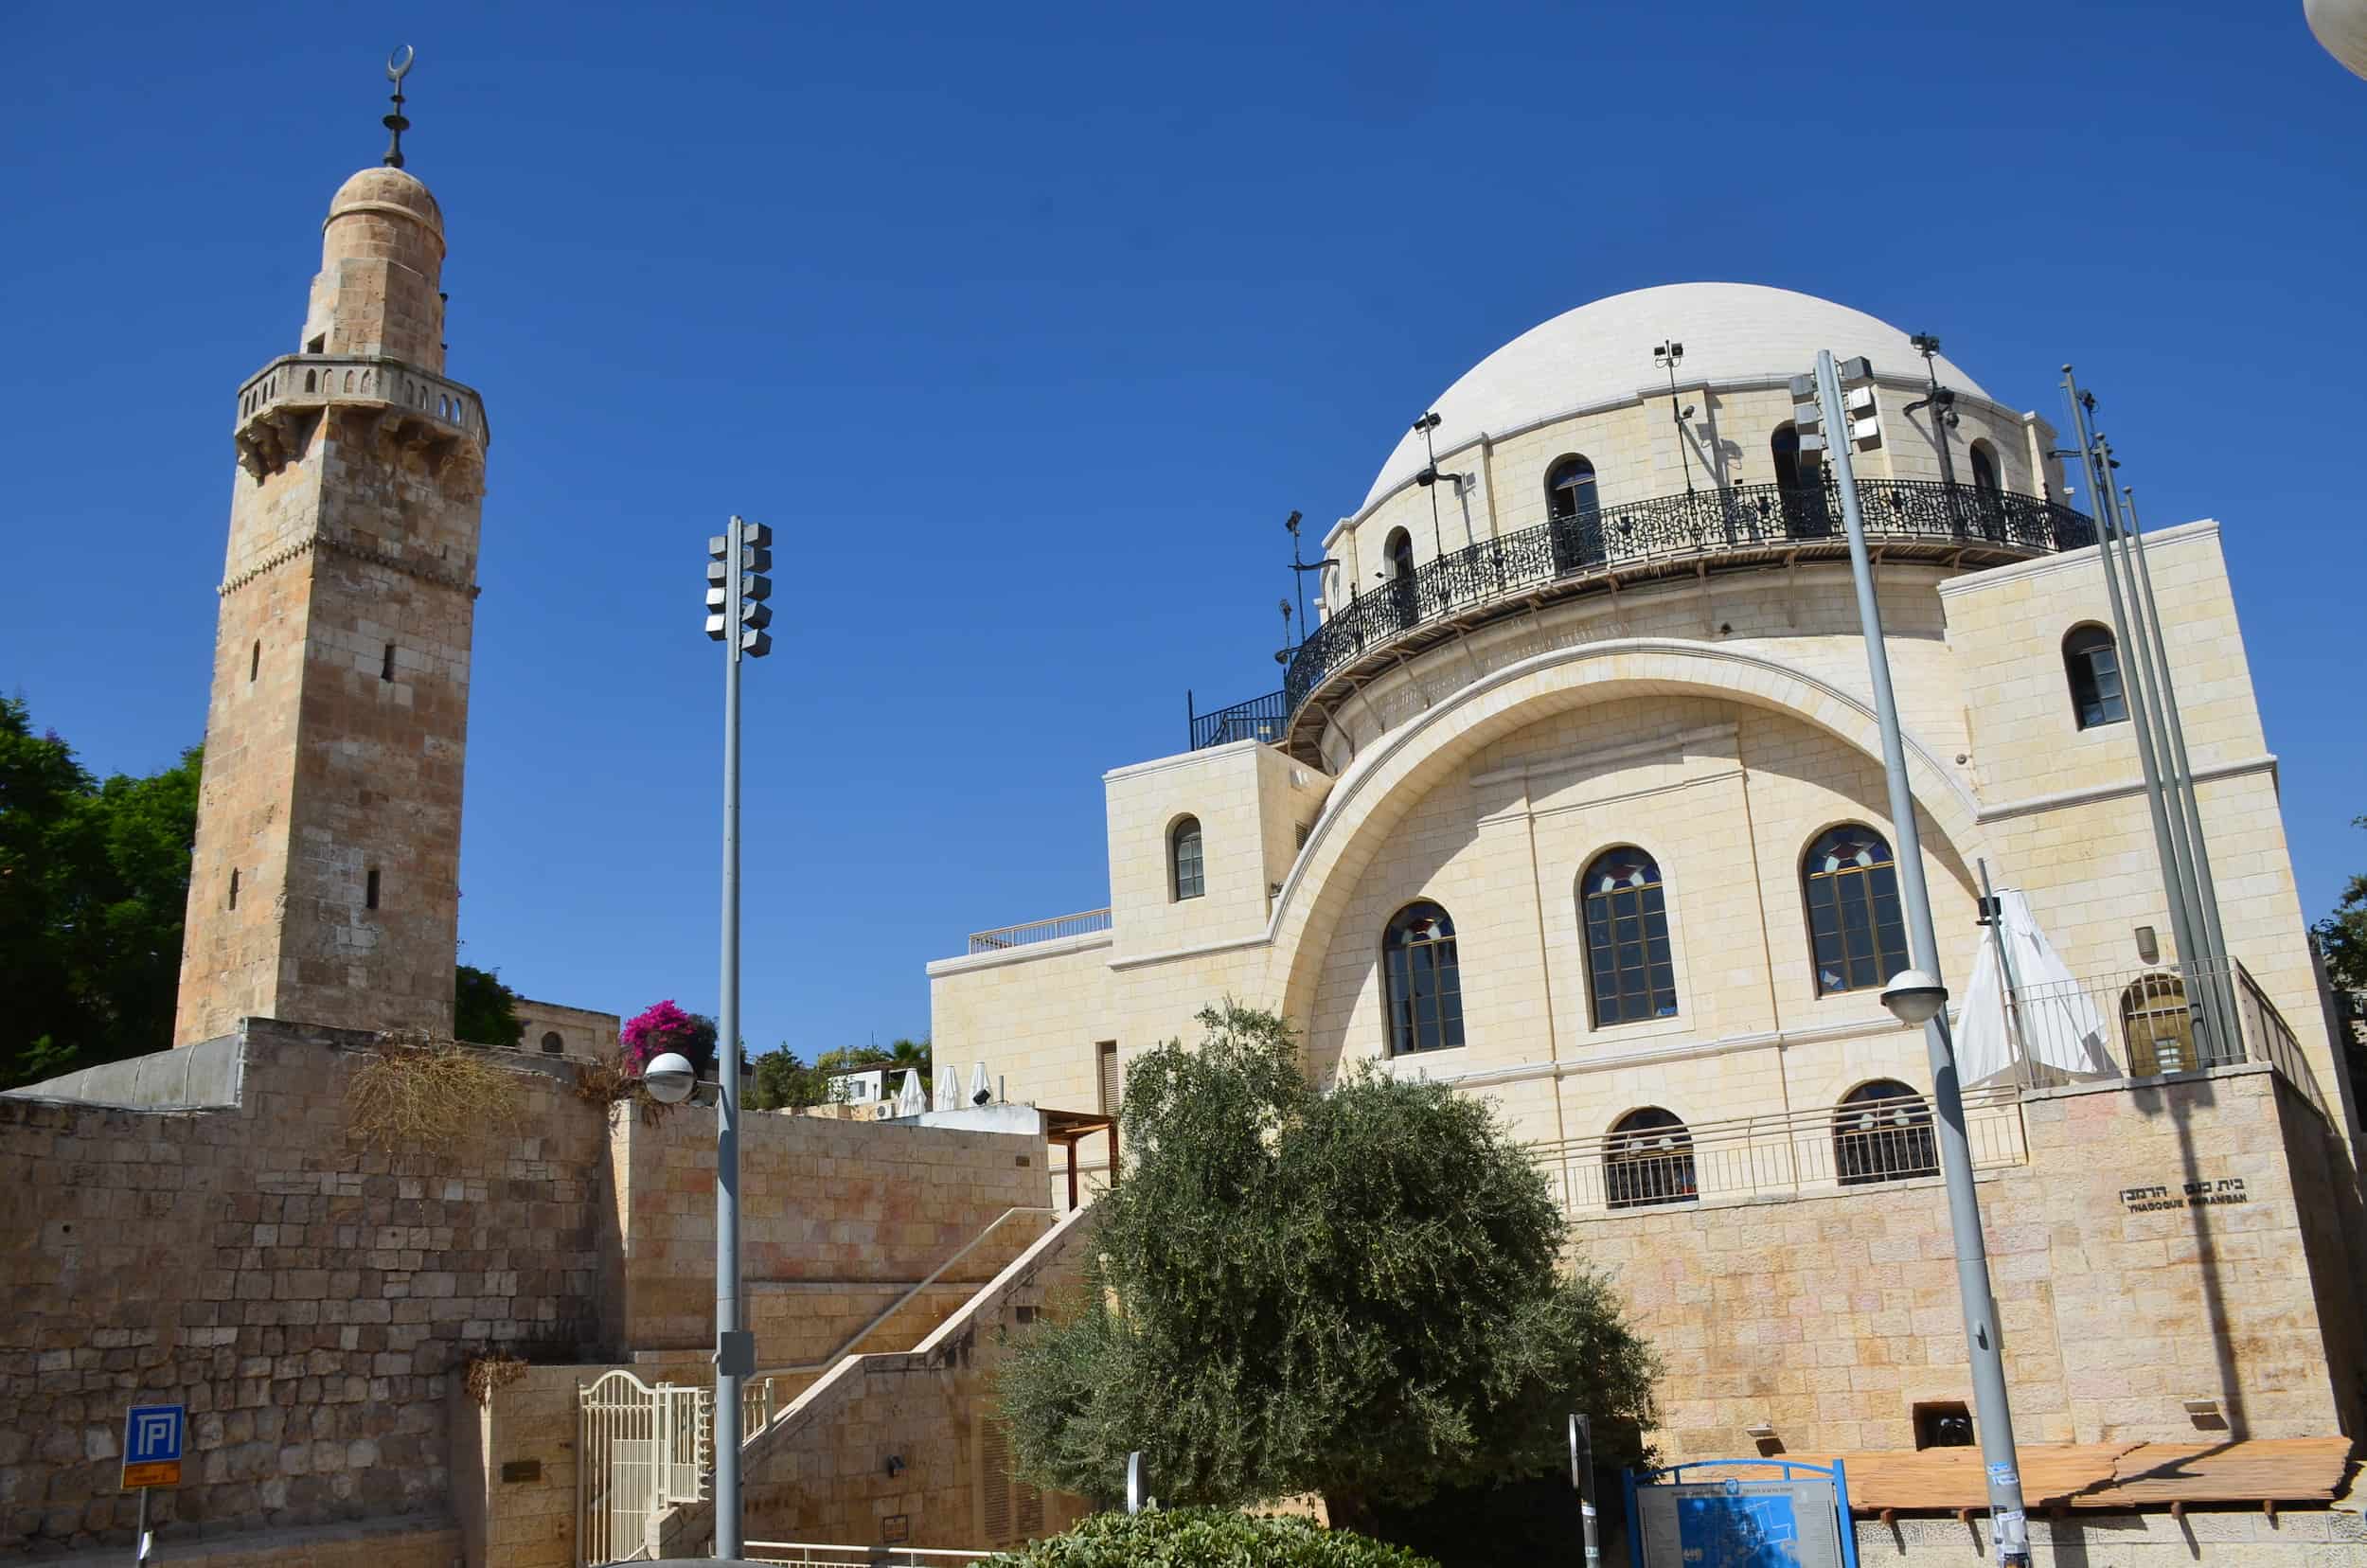 Minaret of the Sidna Omar Mosque (left) and Hurva Synagogue (right) in the Jewish Quarter of Jerusalem